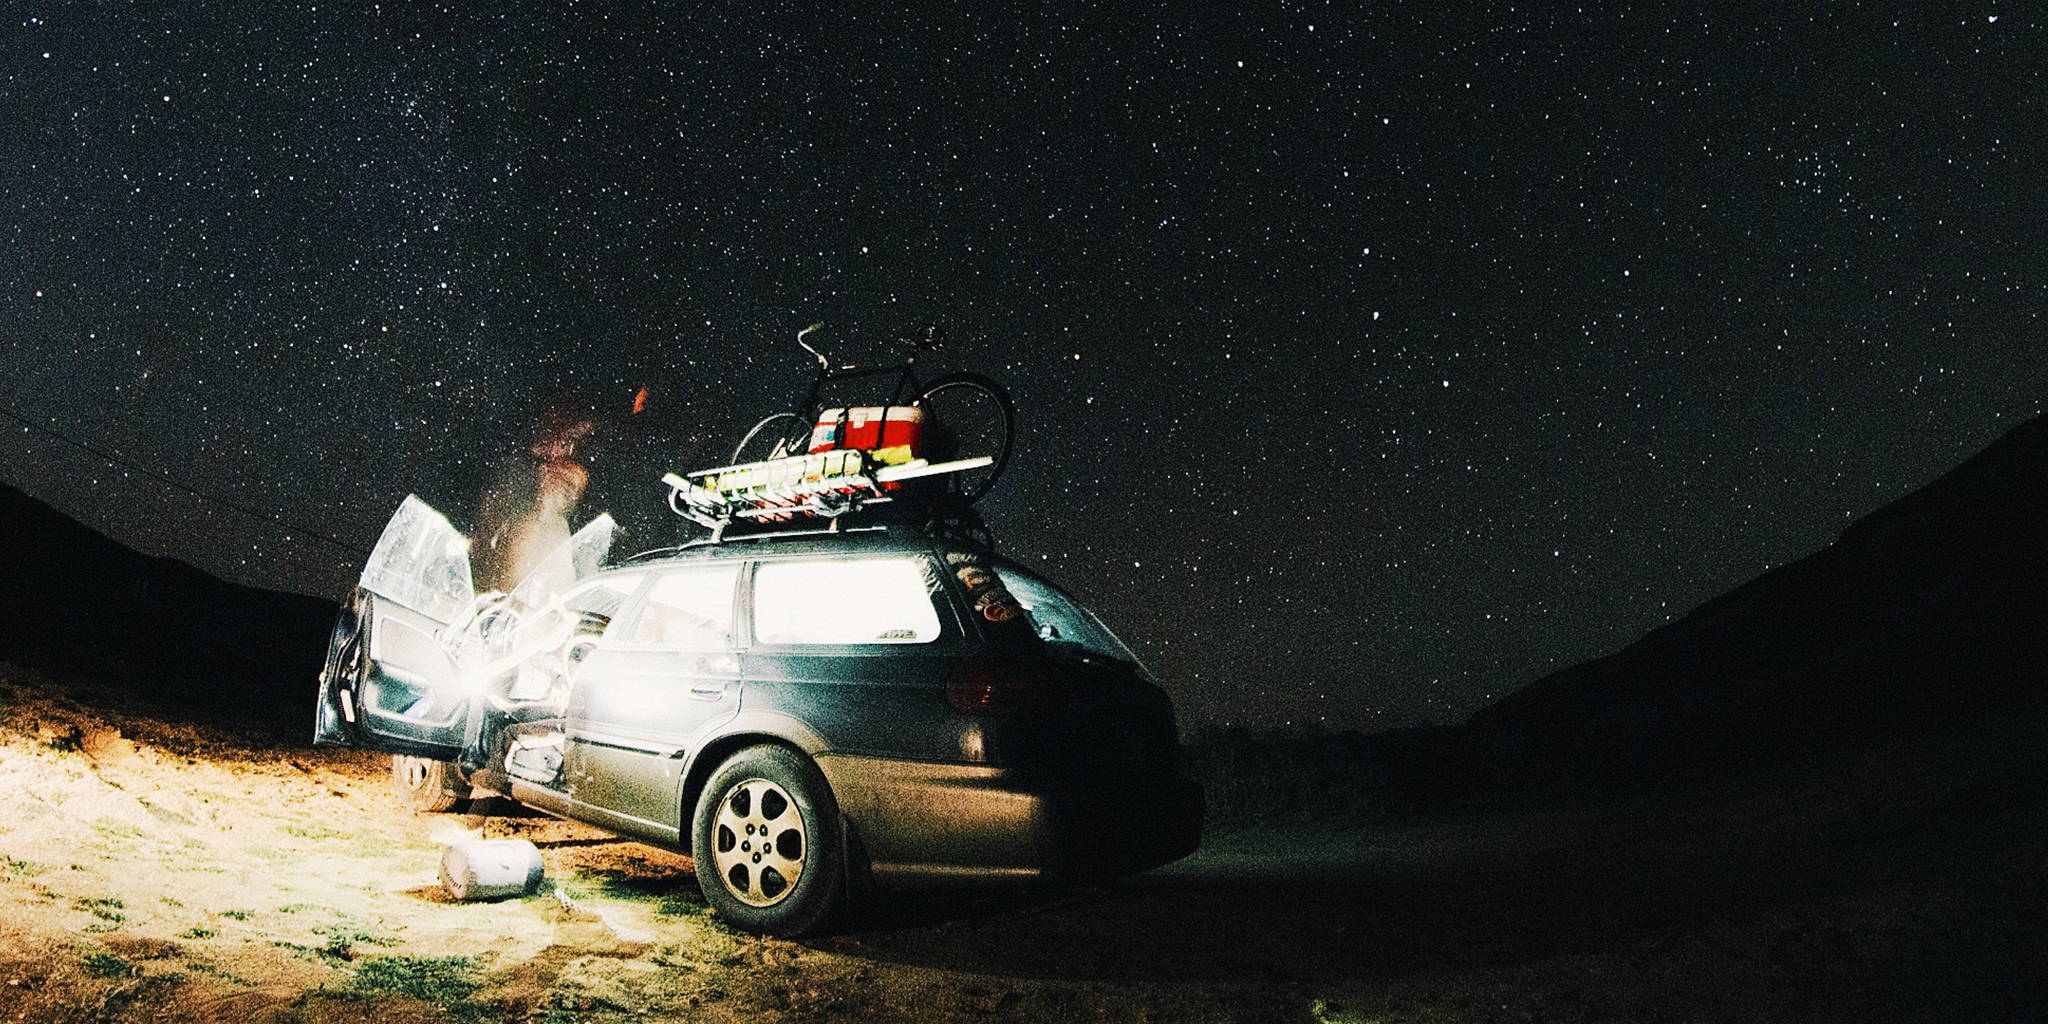 Starry night with a Subaru Outback camping vehicle